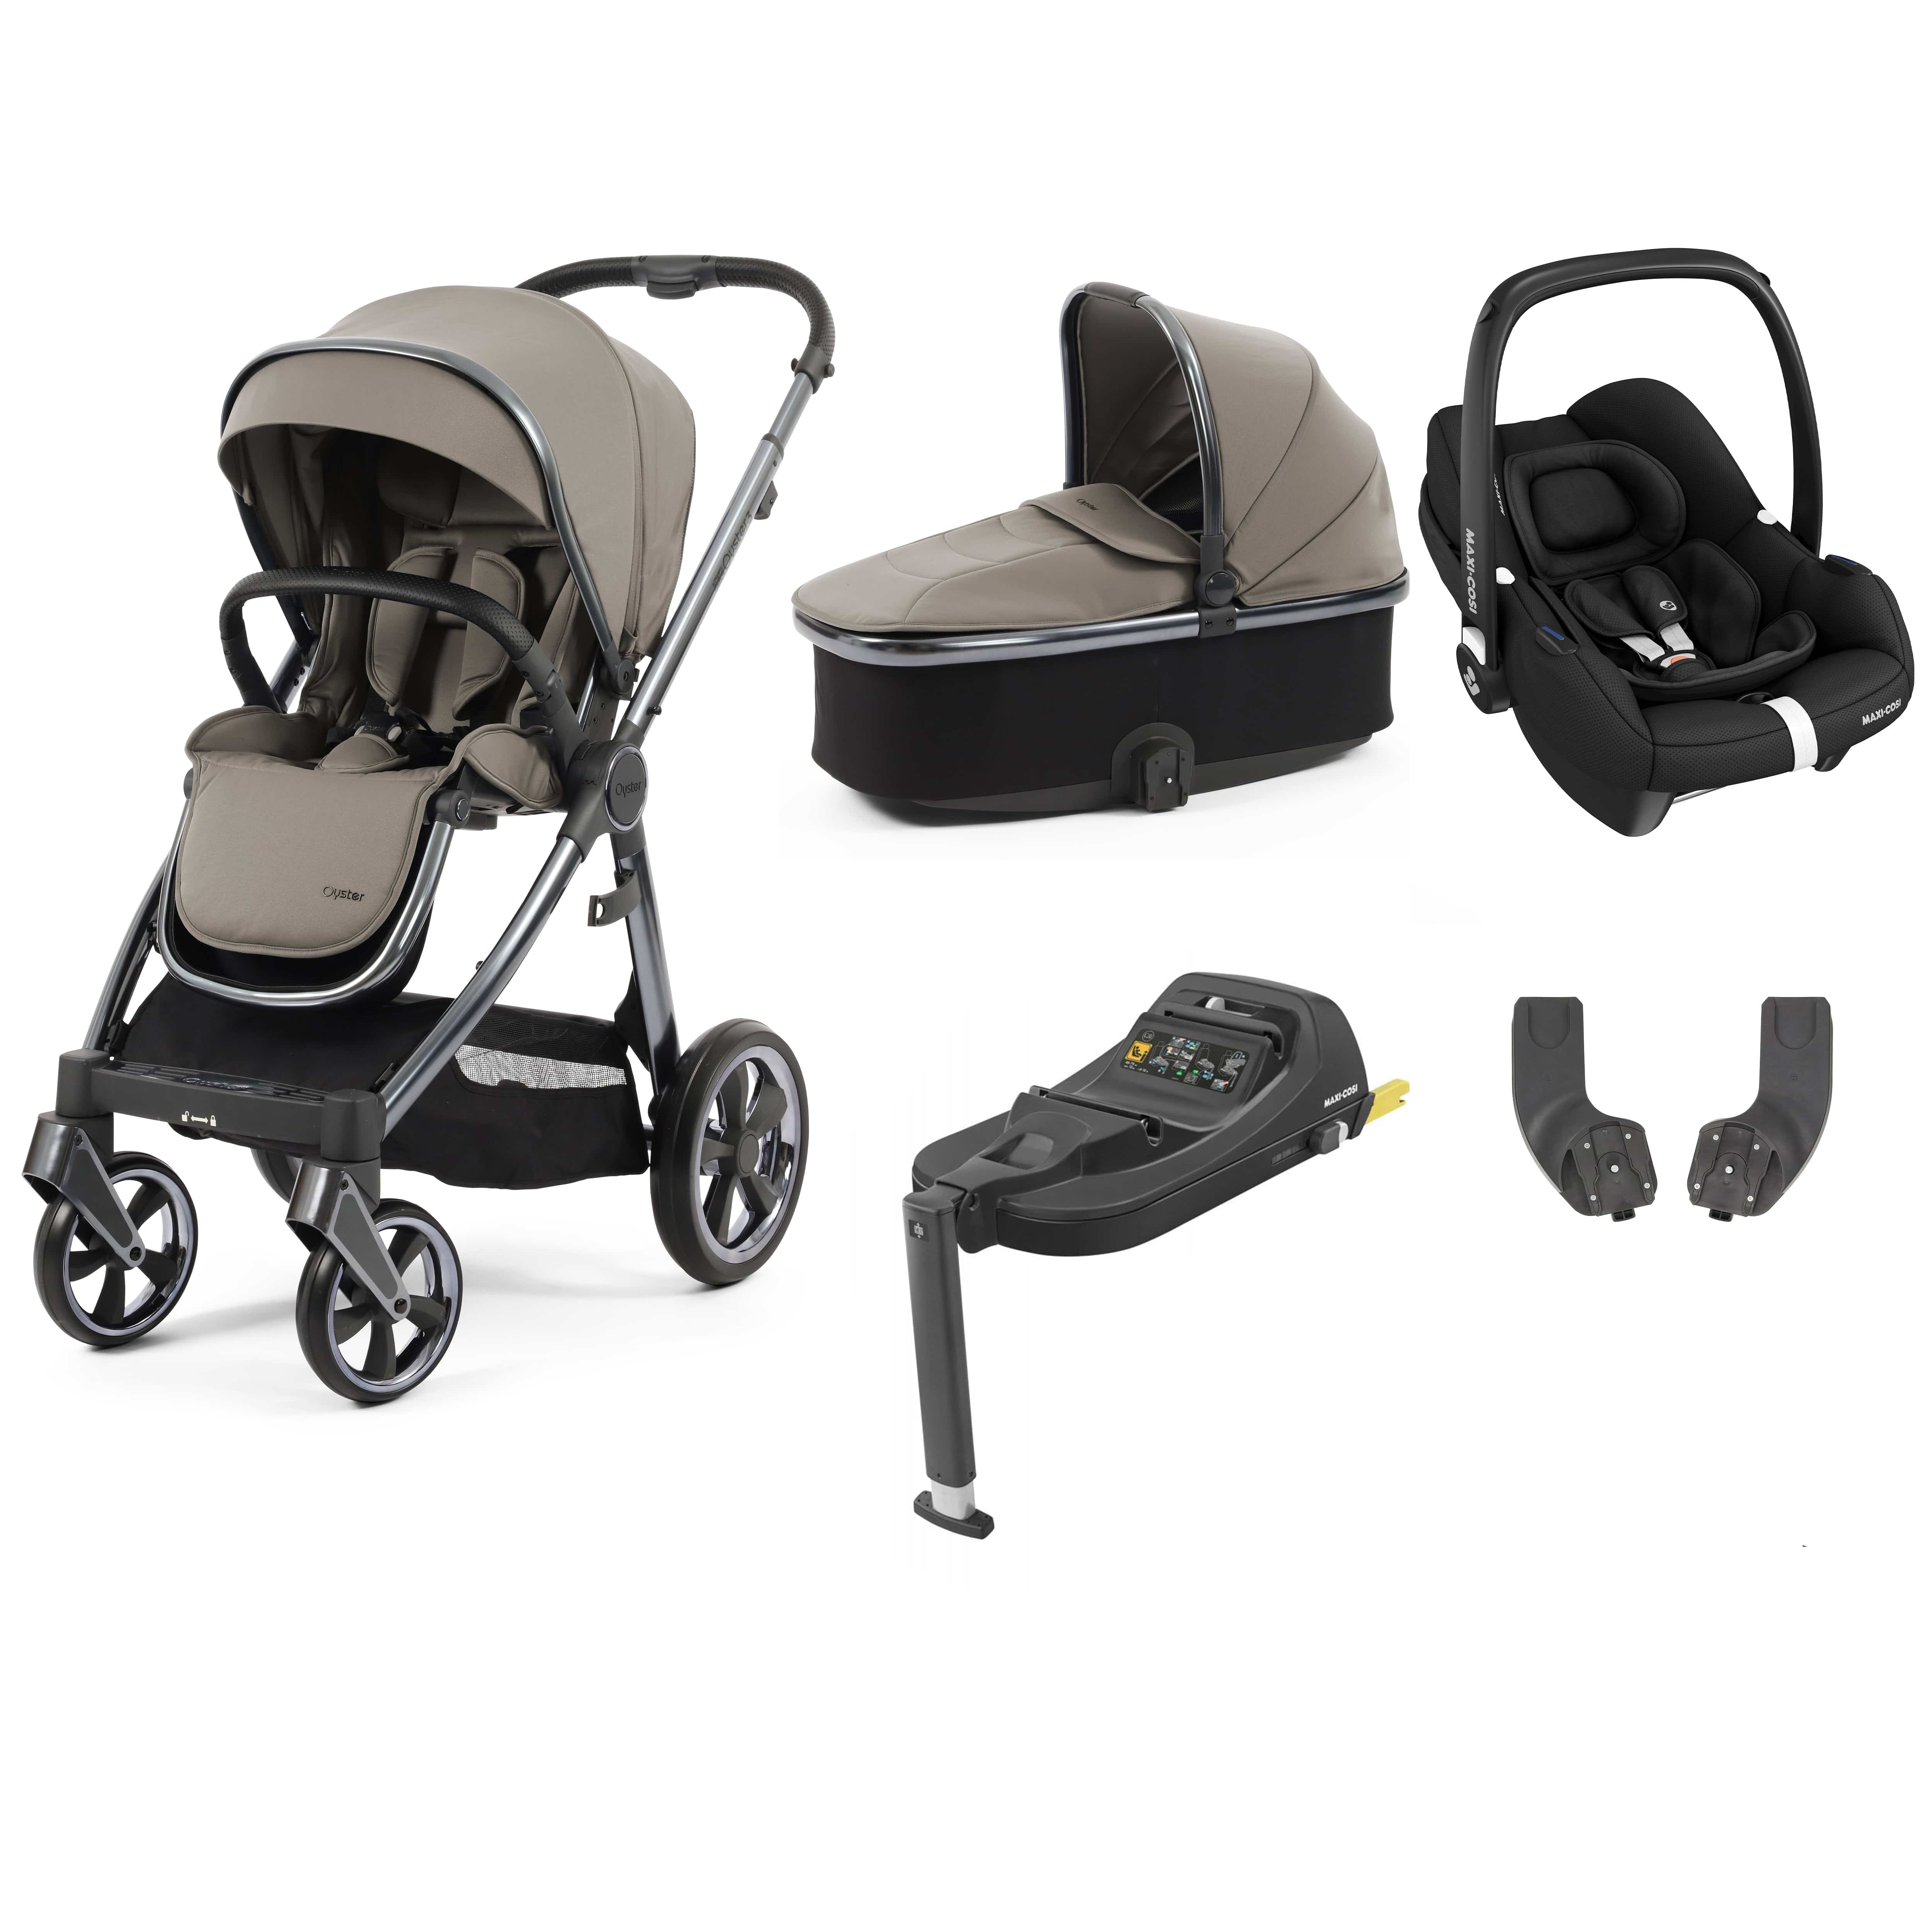 Babystyle Oyster 3 Essential Bundle with Car Seat in Stone Travel Systems 14768-STN 5060711567259